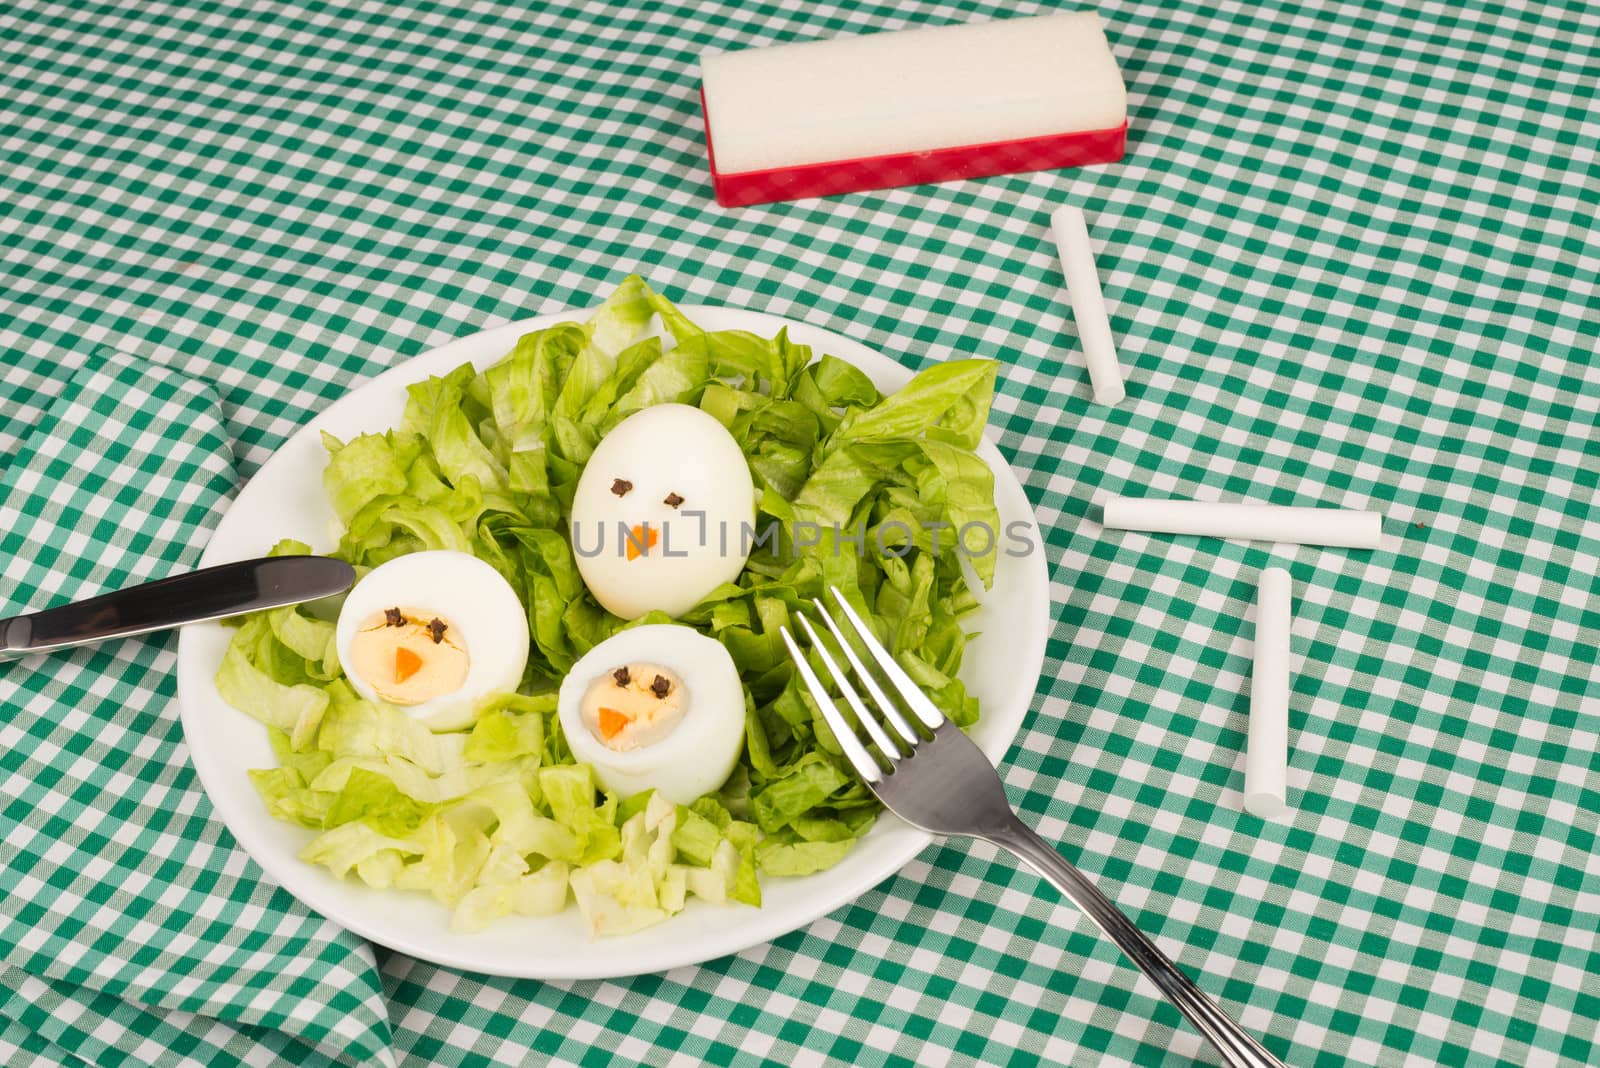 A salad served with decorated eggs, a kid meal